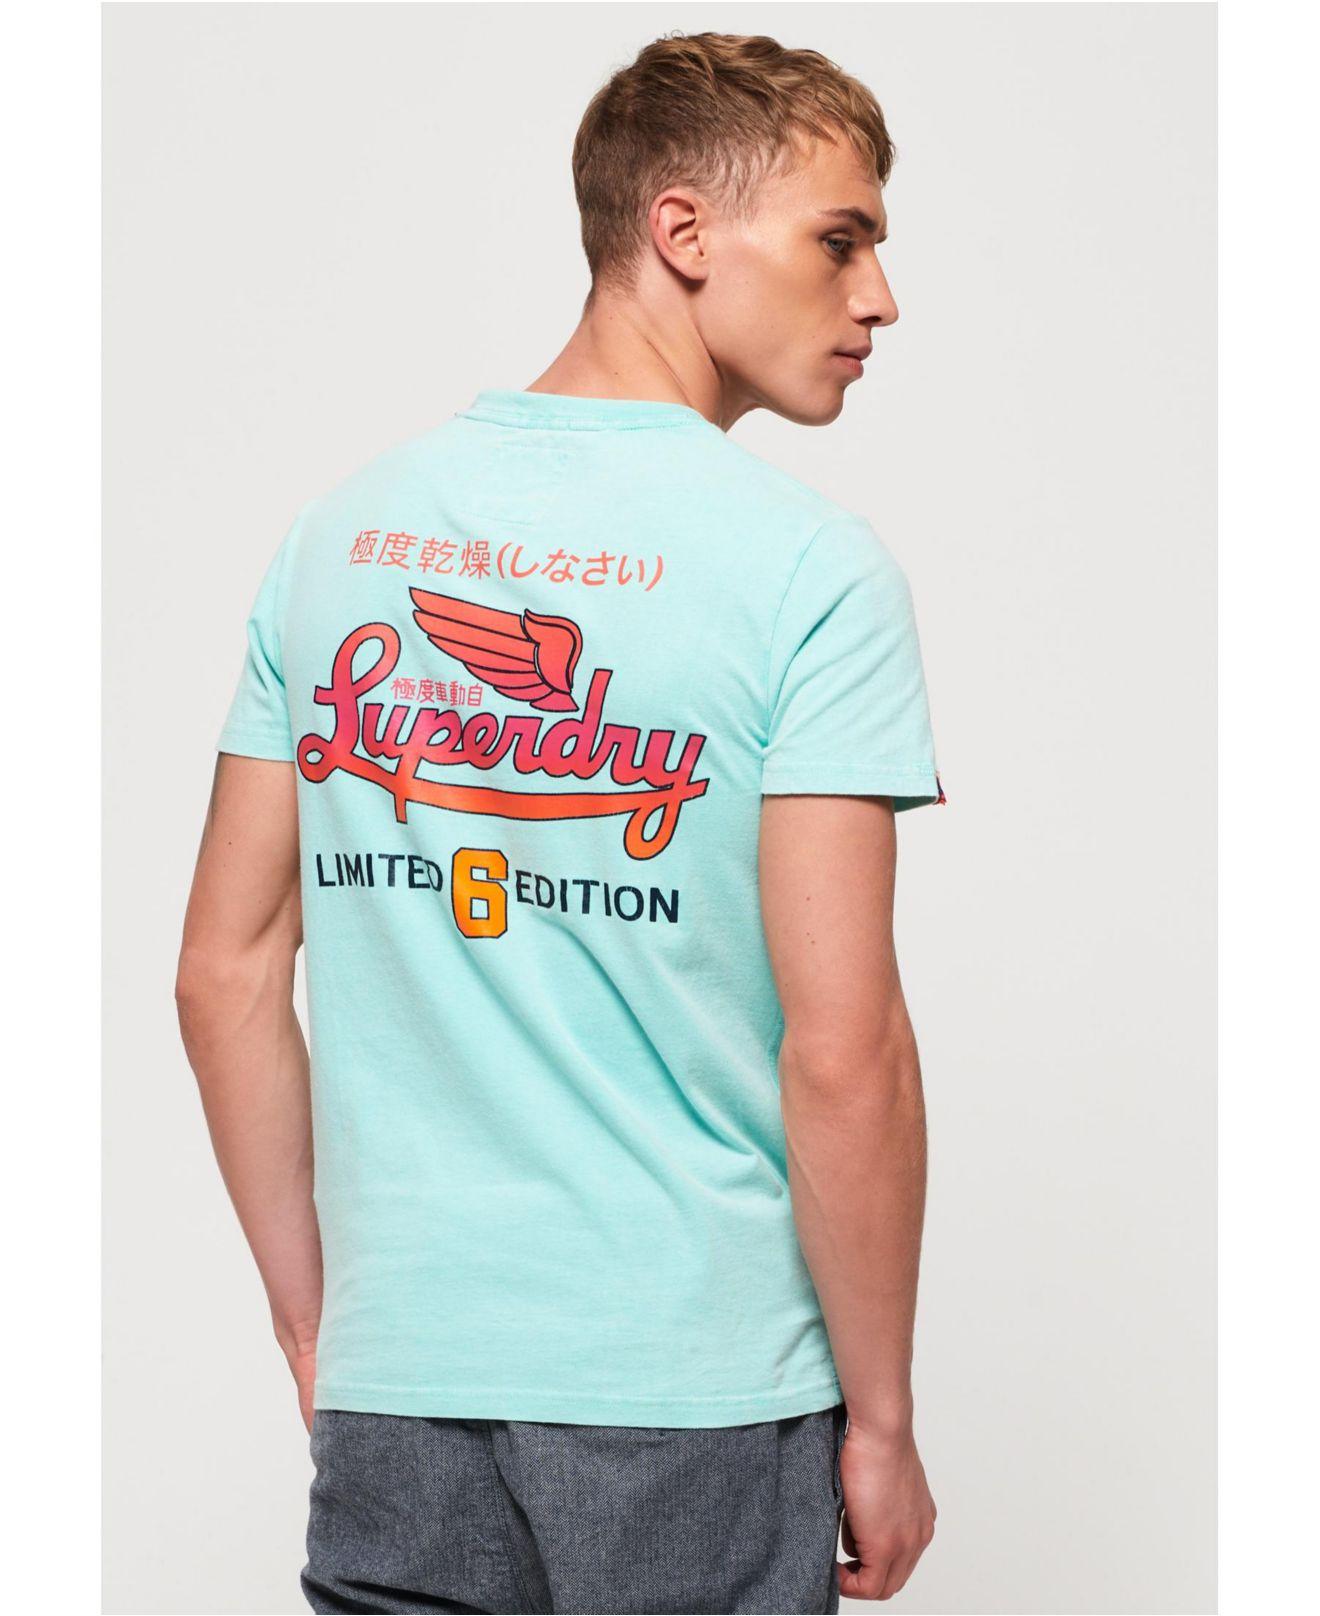 Superdry Limited Icarus Hyper Classics T-shirt in Blue for Men - Lyst